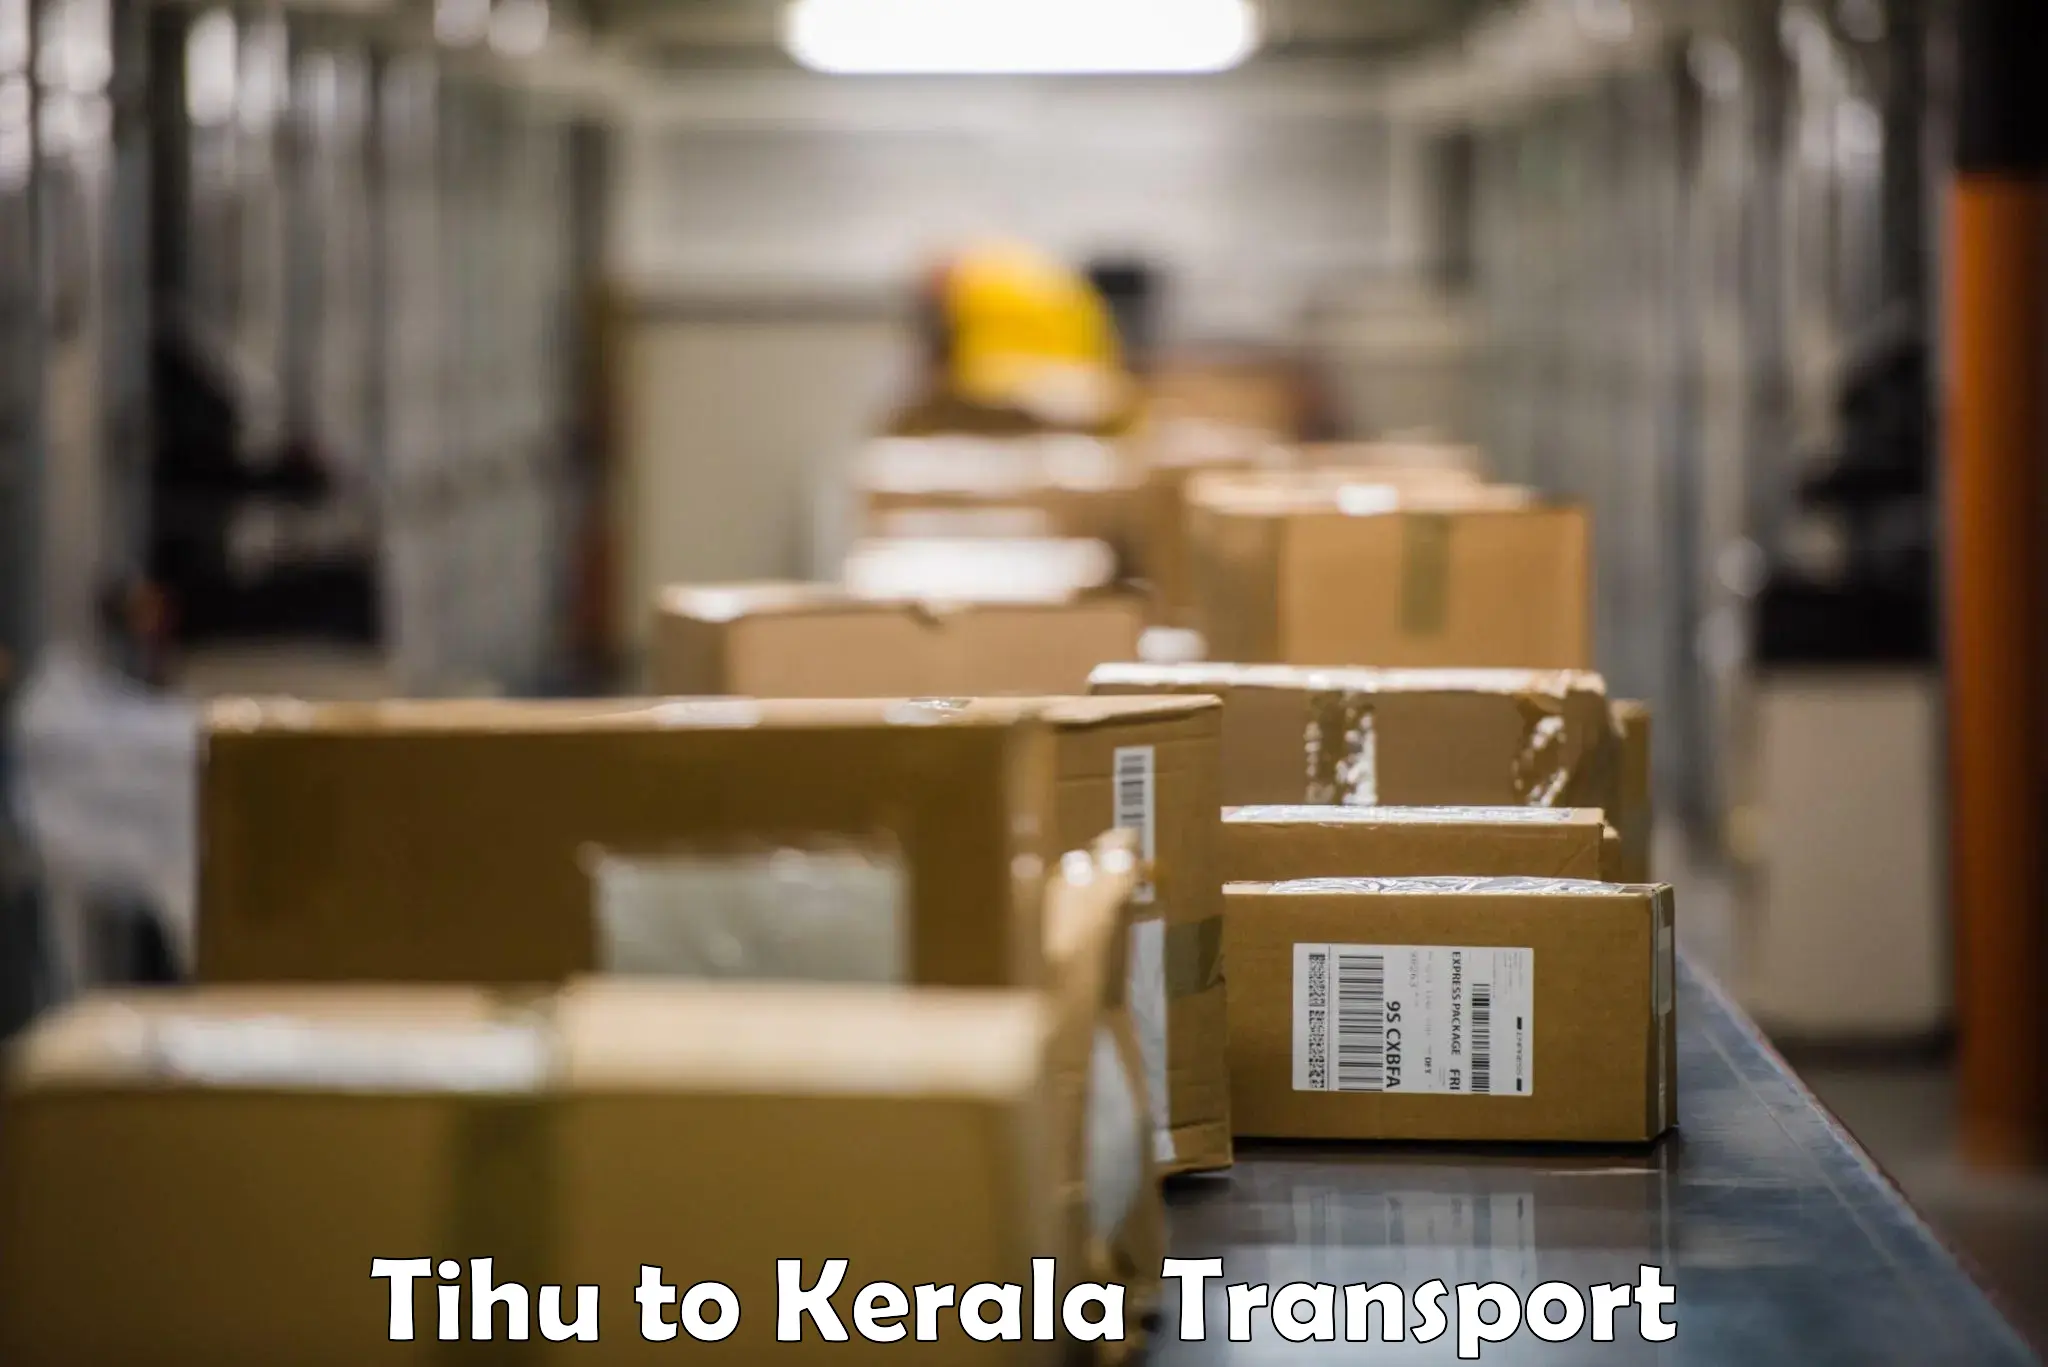 Delivery service Tihu to Kerala